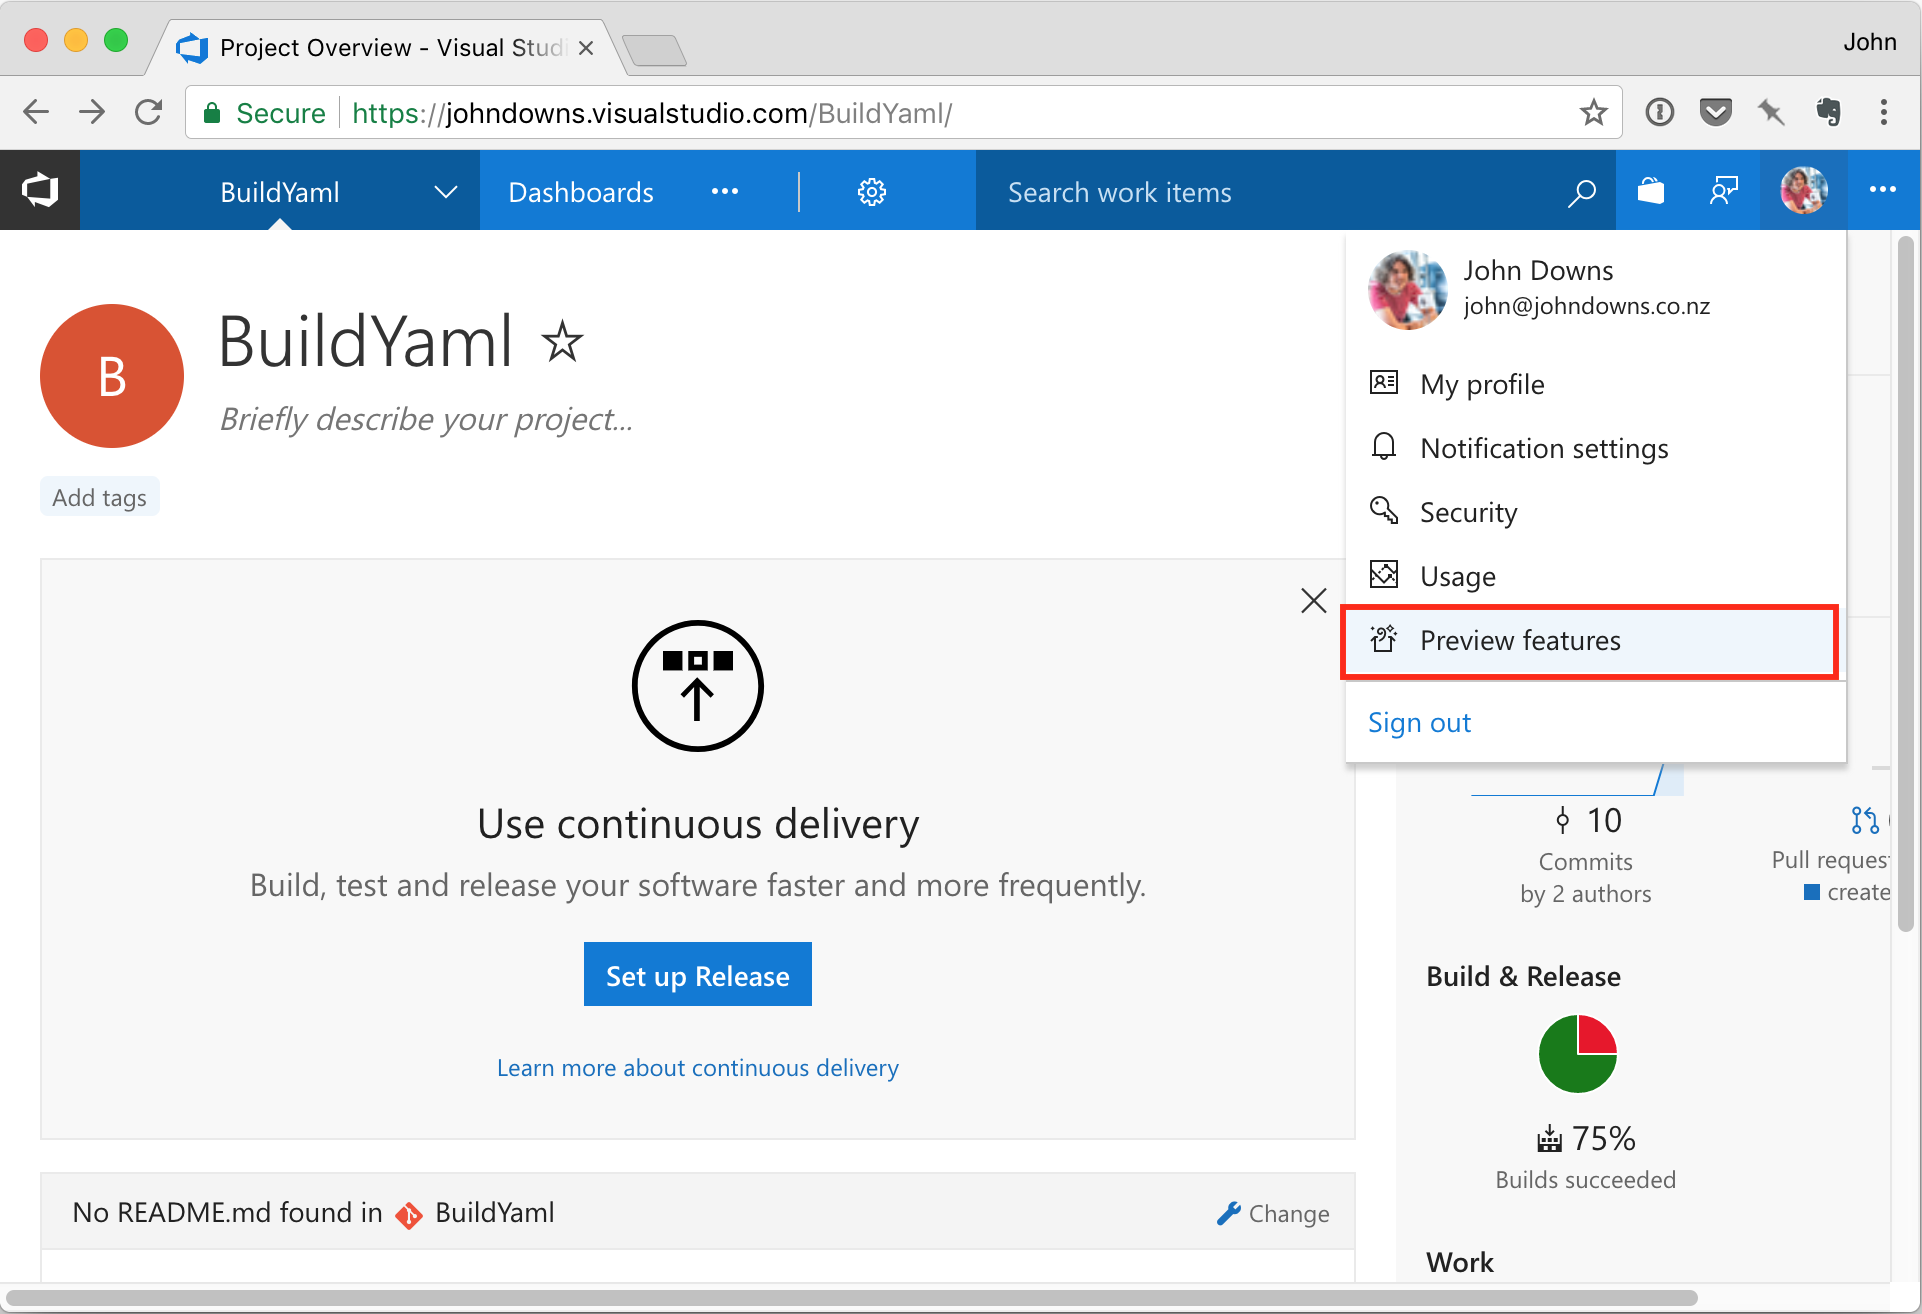 VSTS Preview Features option